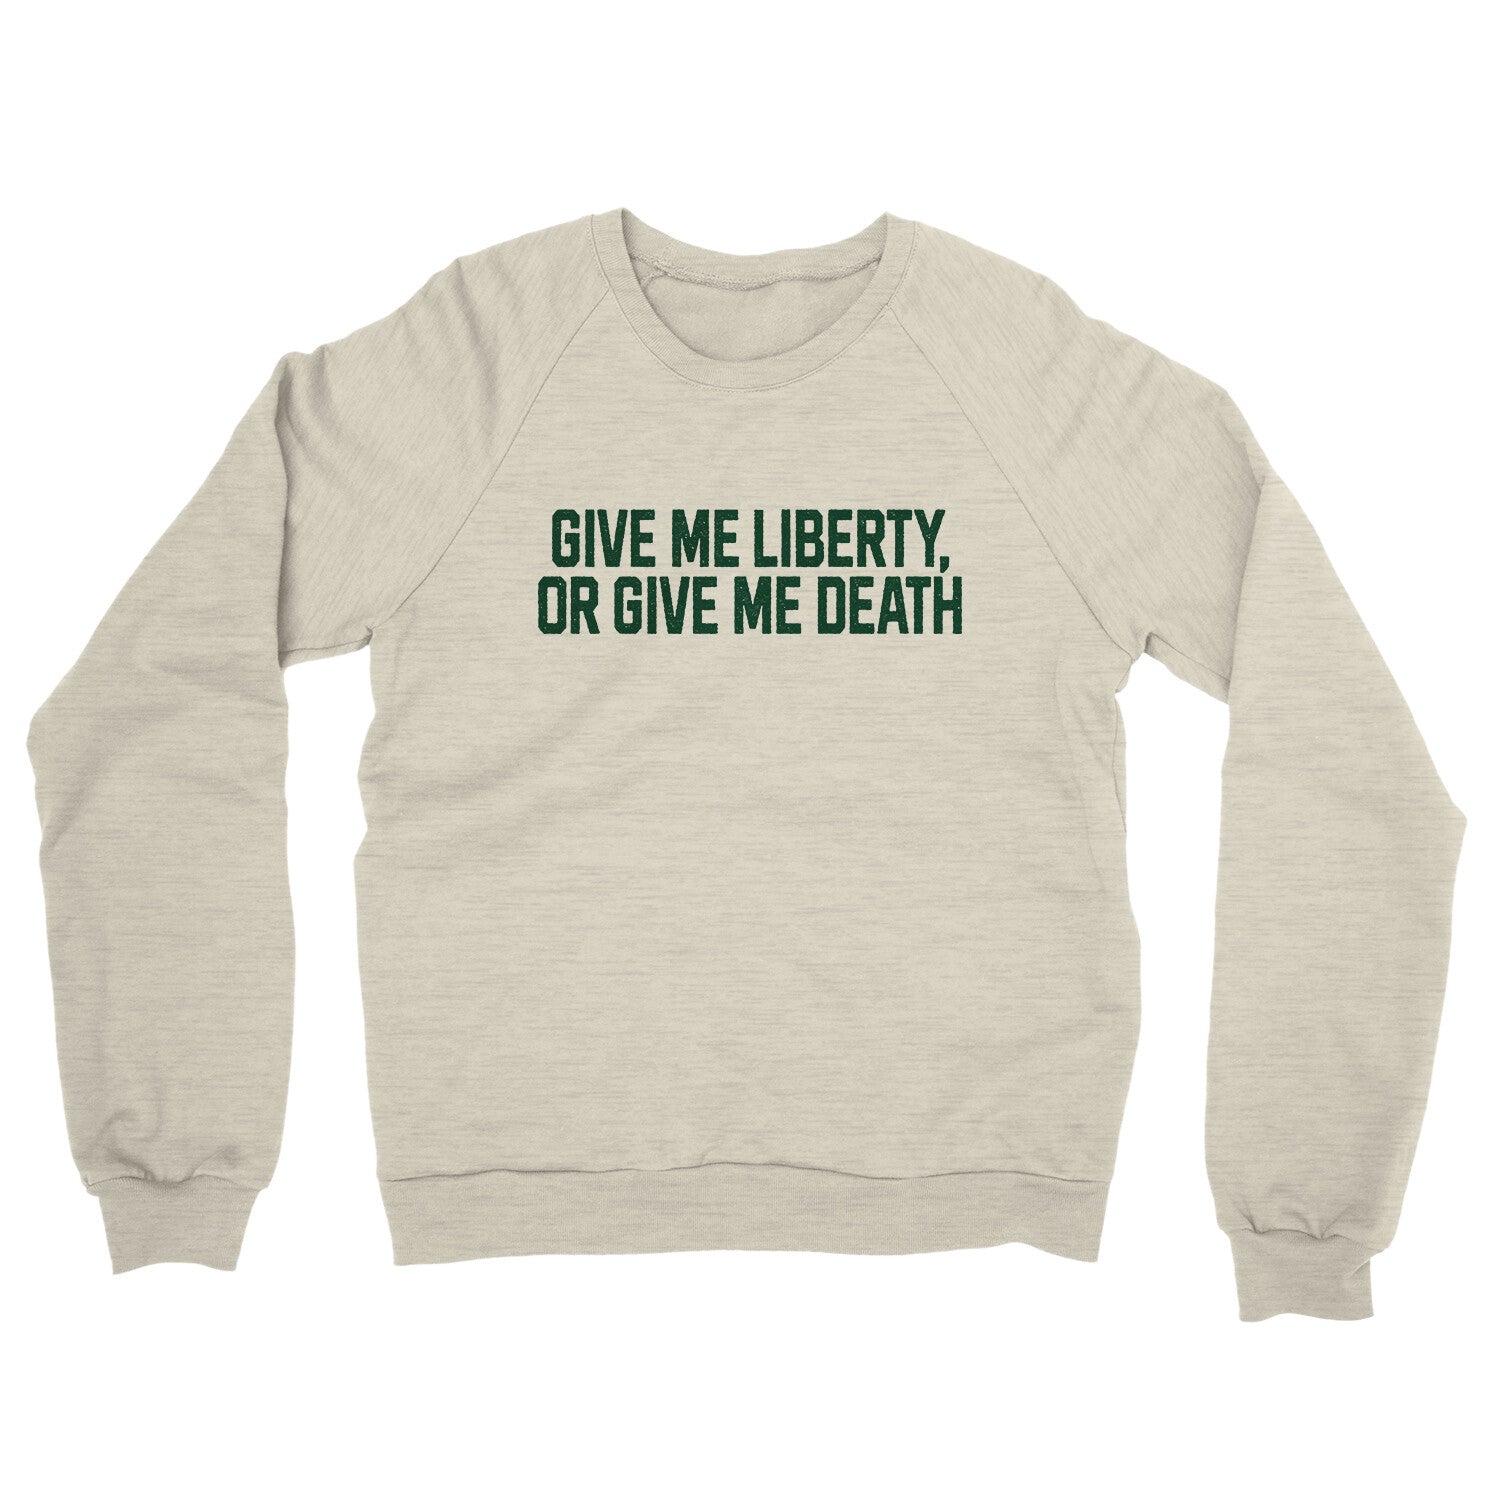 Give Me Liberty or Give Me Death in Heather Oatmeal Color